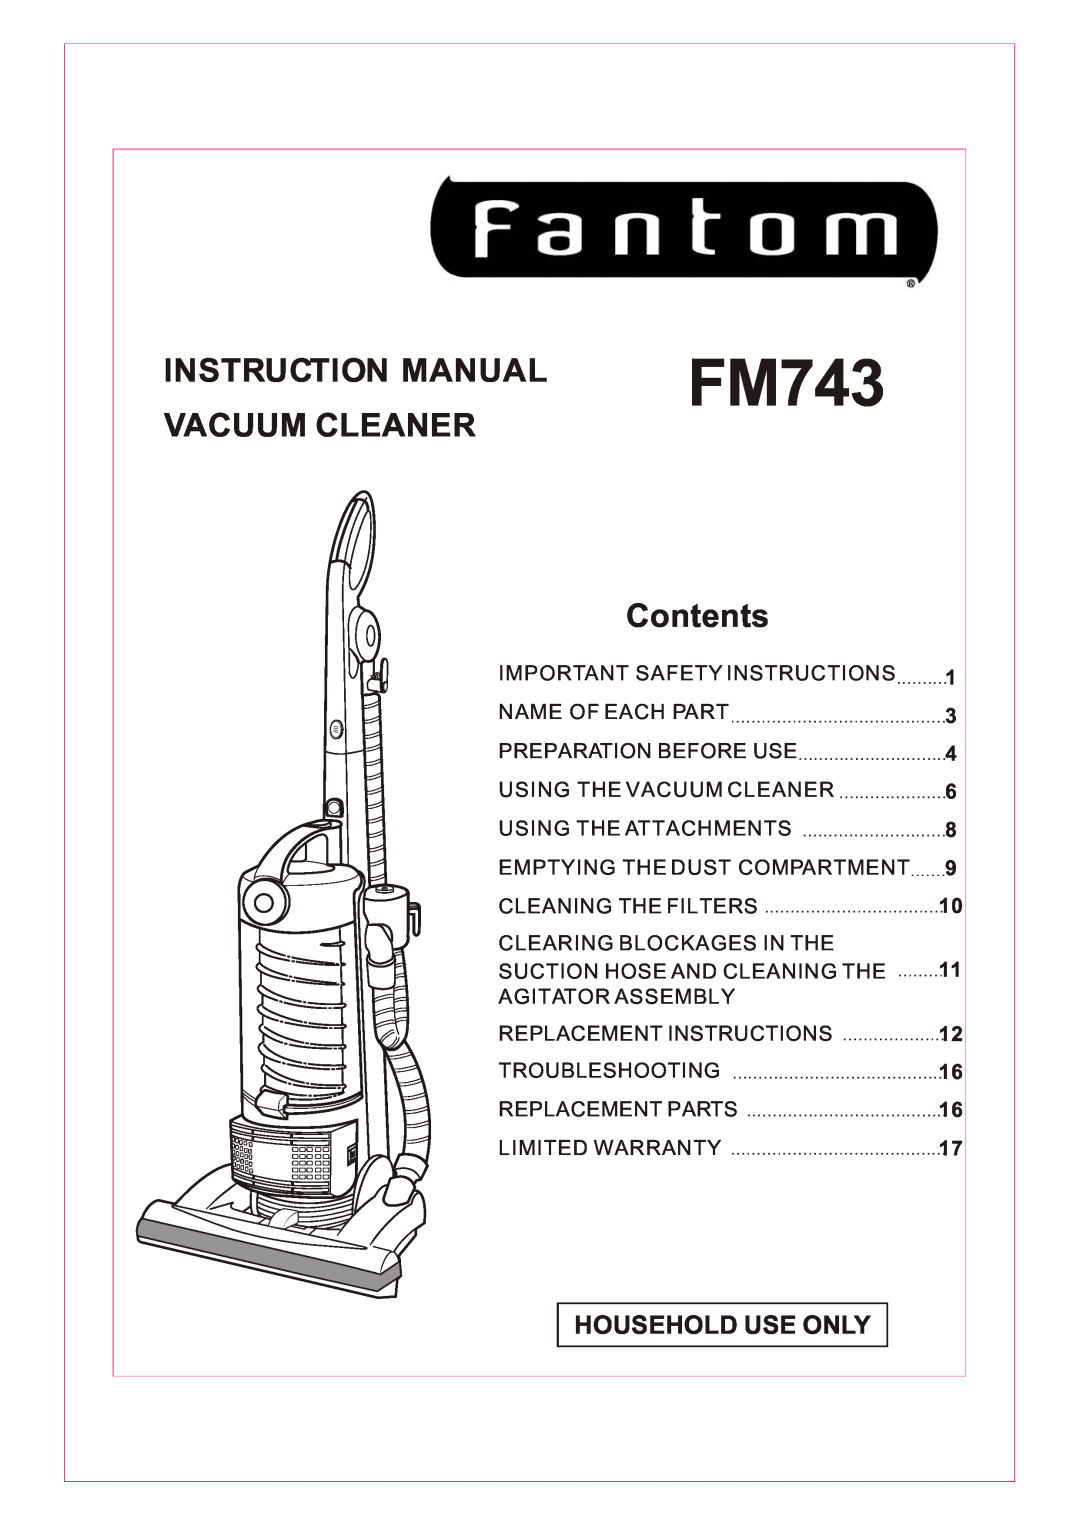 Fantom Vacuum FM743 instruction manual Vacuum Cleaner, Contents, Household Use Only, 1 3 4 6 8 9 10 11 12 